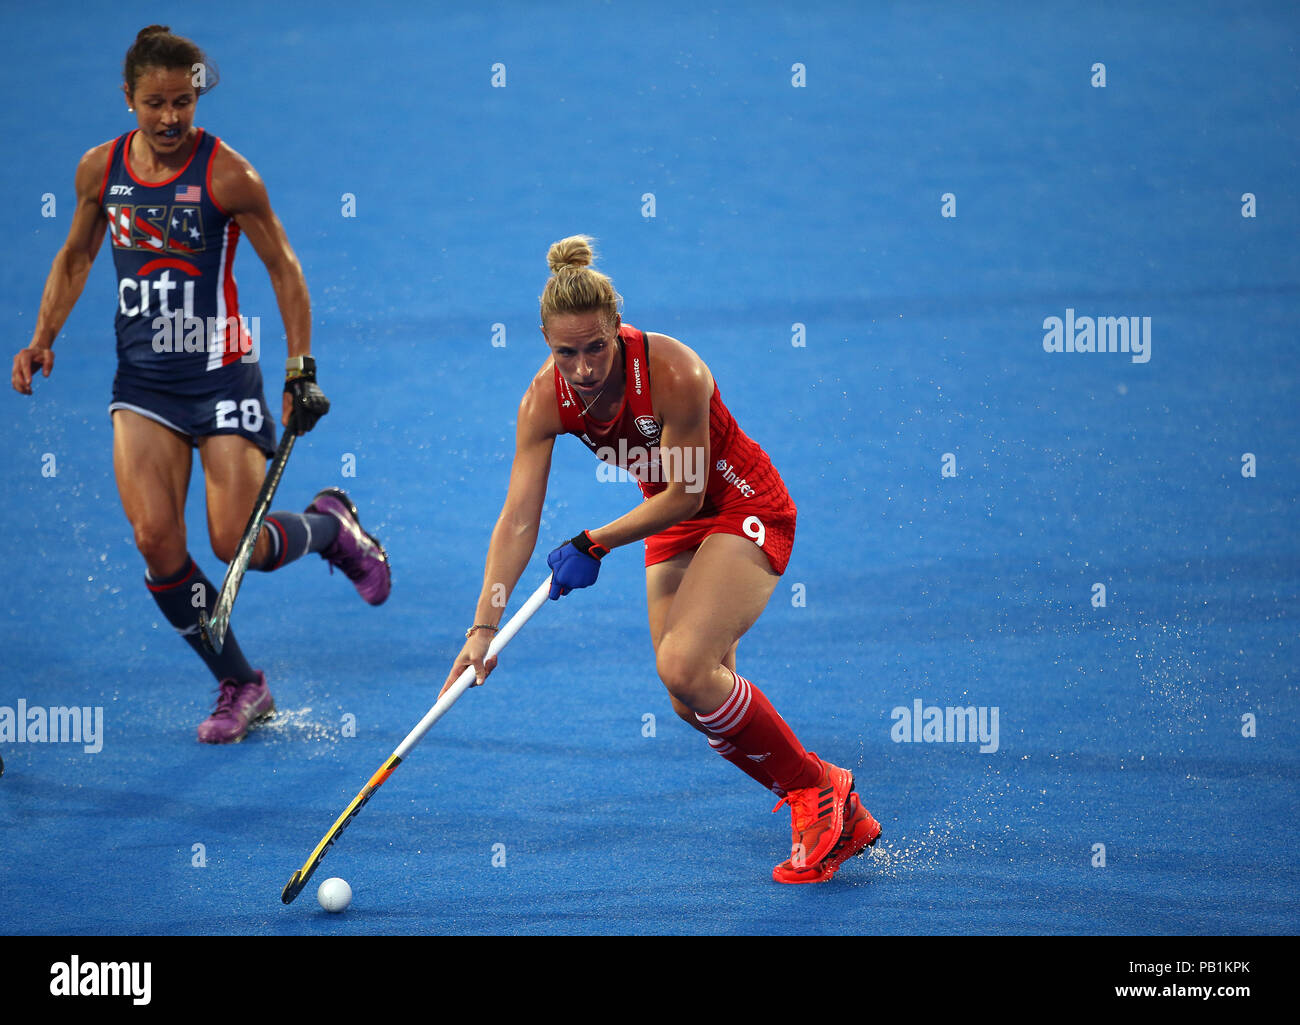 England's Susannah Townsend in action during the national Vitality Women's Hockey World Cup match at The Lee Valley Hockey and Tennis Centre, London. PRESS ASSOCIATION Photo, Picture date: Wednesday July 25, 2018. Photo credit should read: Steven Paston/PA Wire. Stock Photo